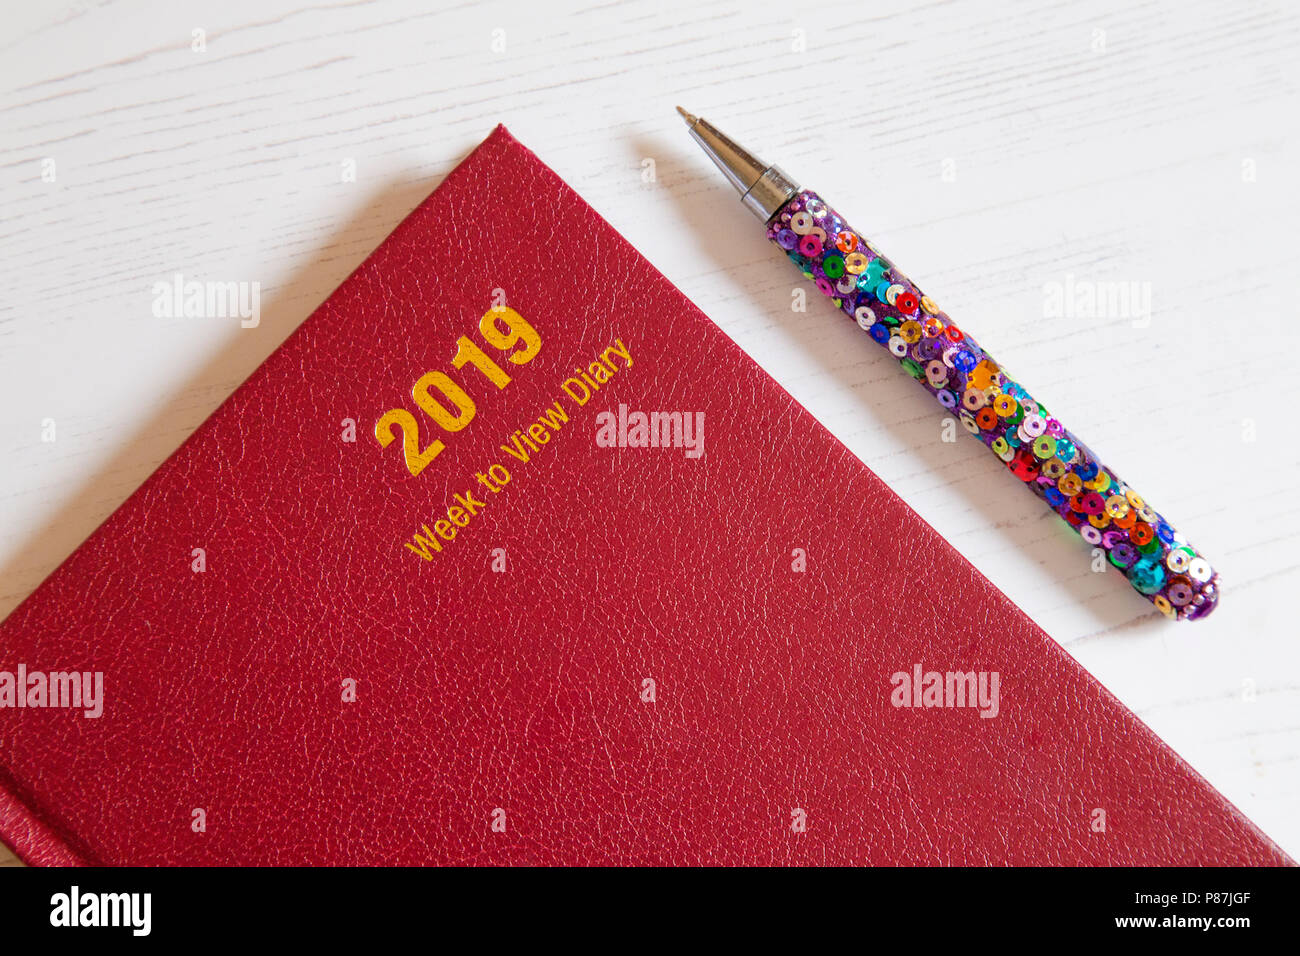 A red 2019 desk diary with a pen. Stock Photo